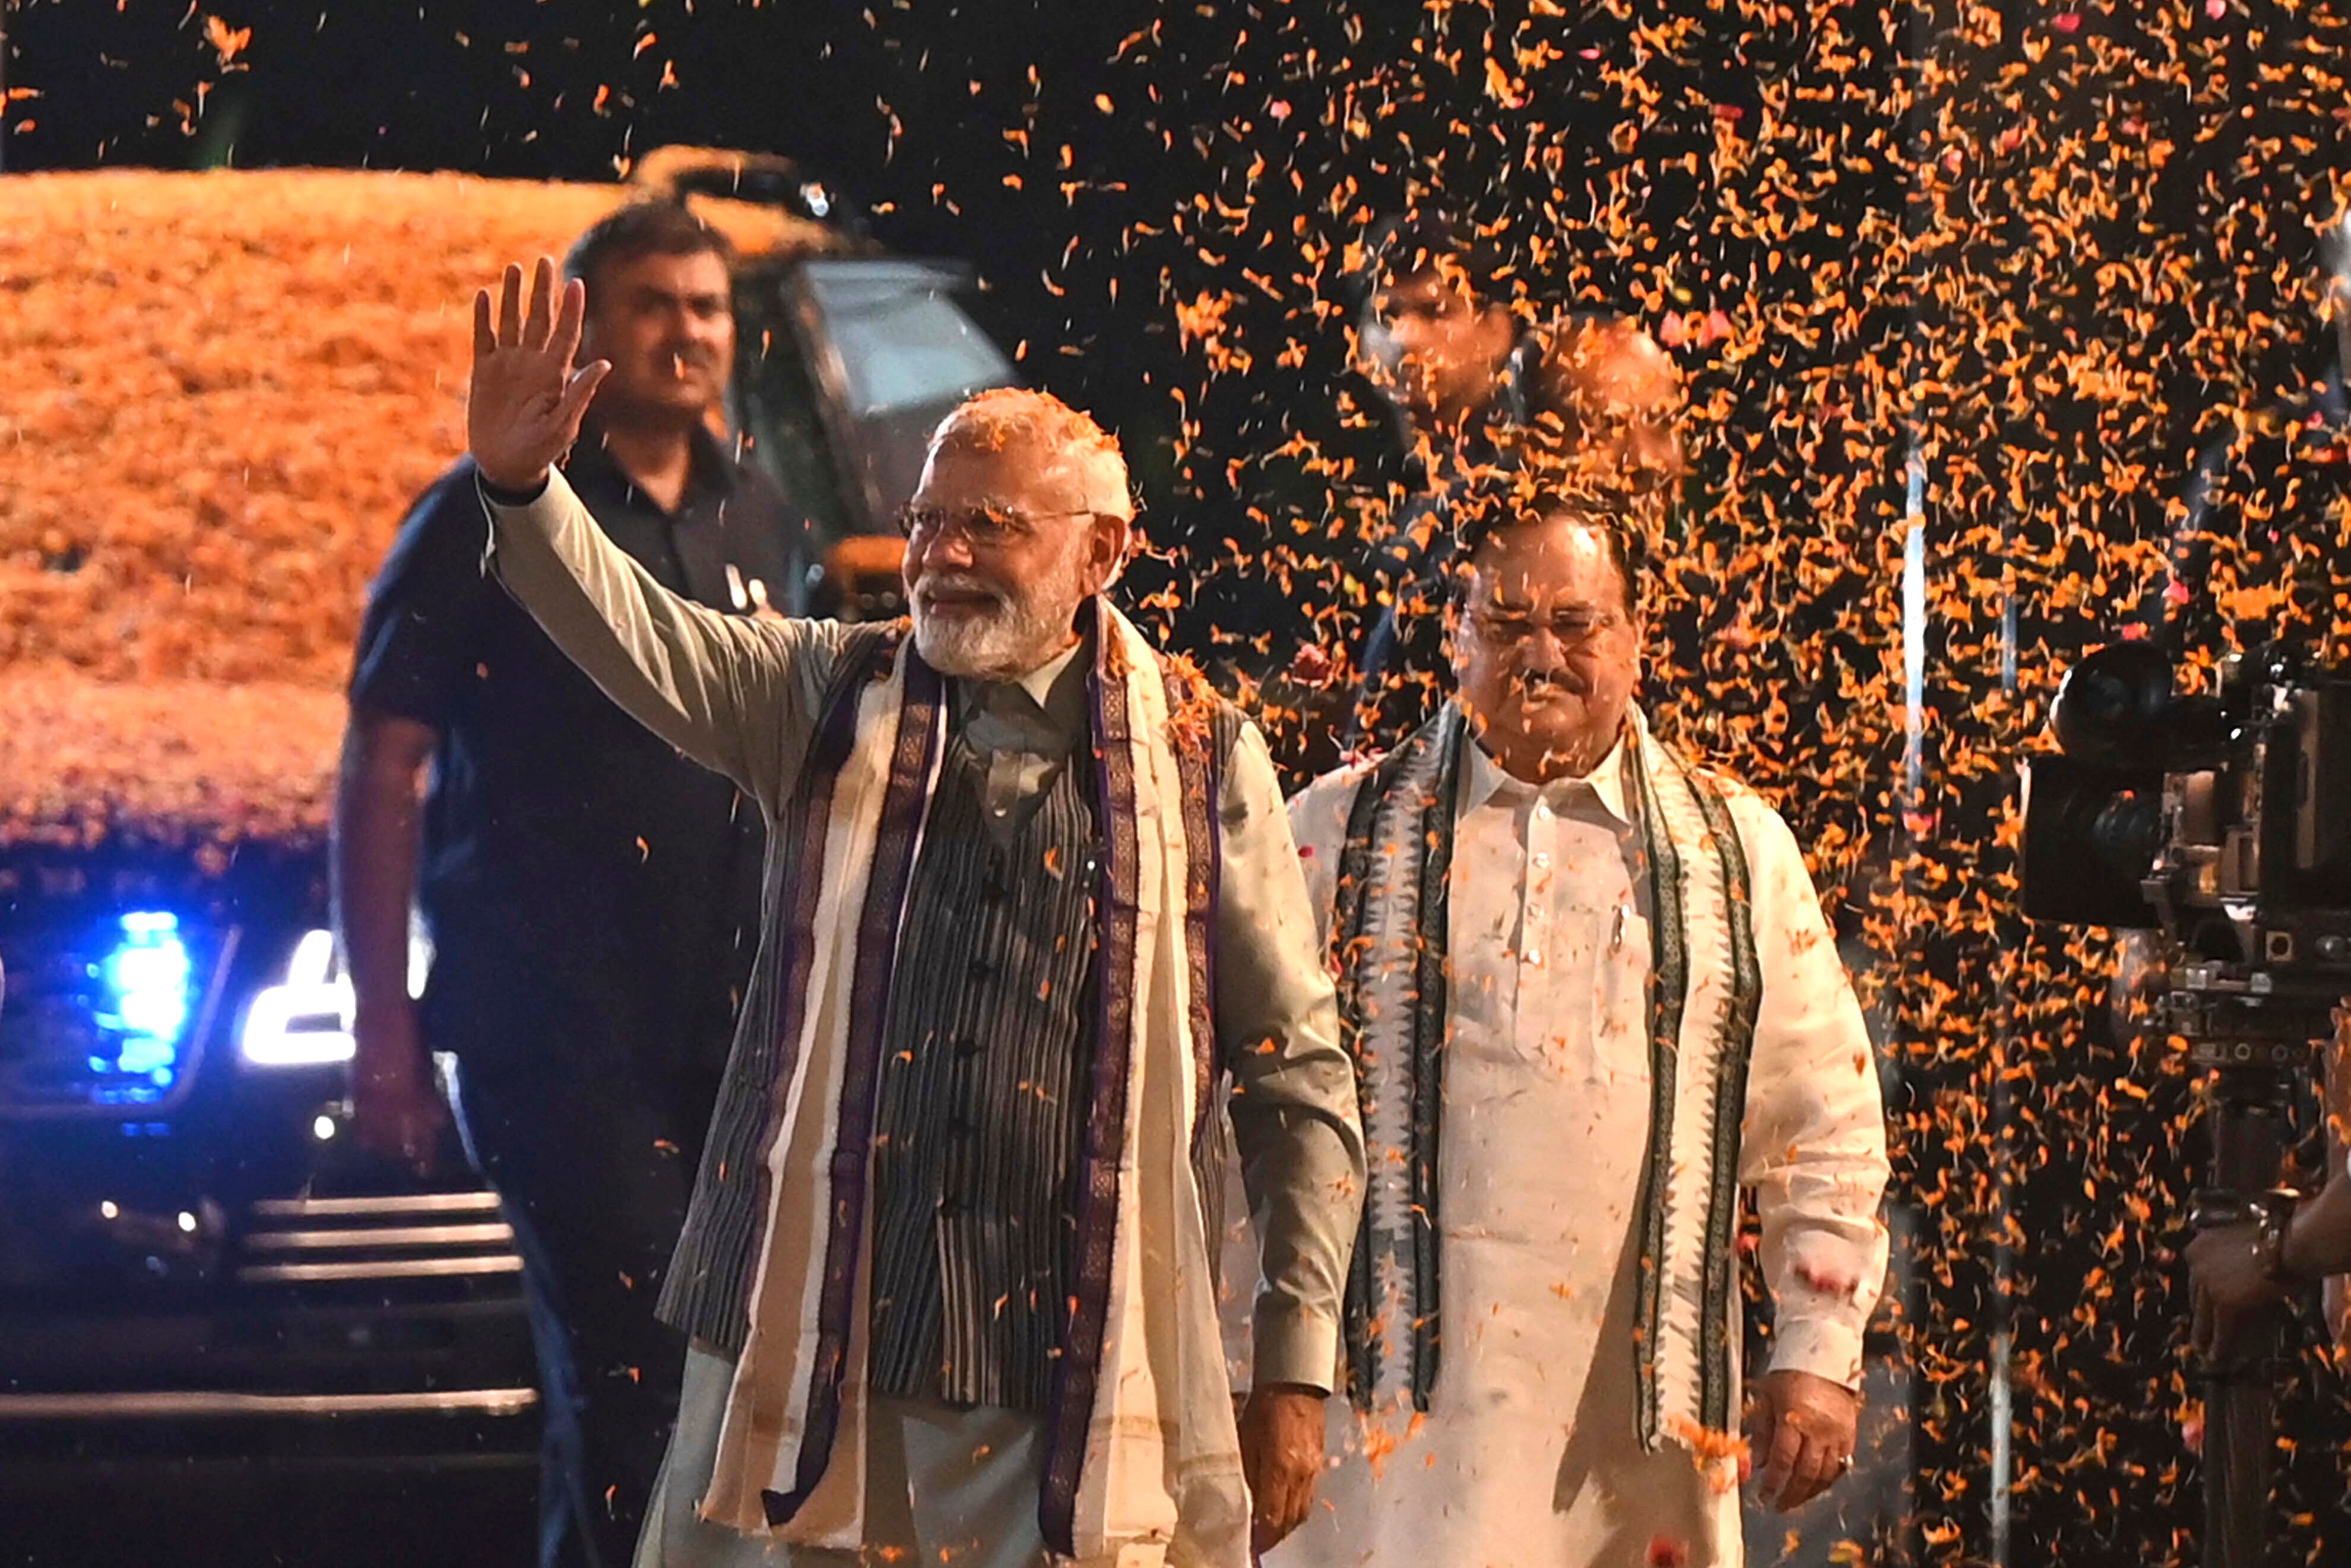 Supporters shower flower petals on Indian Prime Minister Narendra Modi on Wednesday after the country’s successful hosting of a G20 summit. Photo: AP